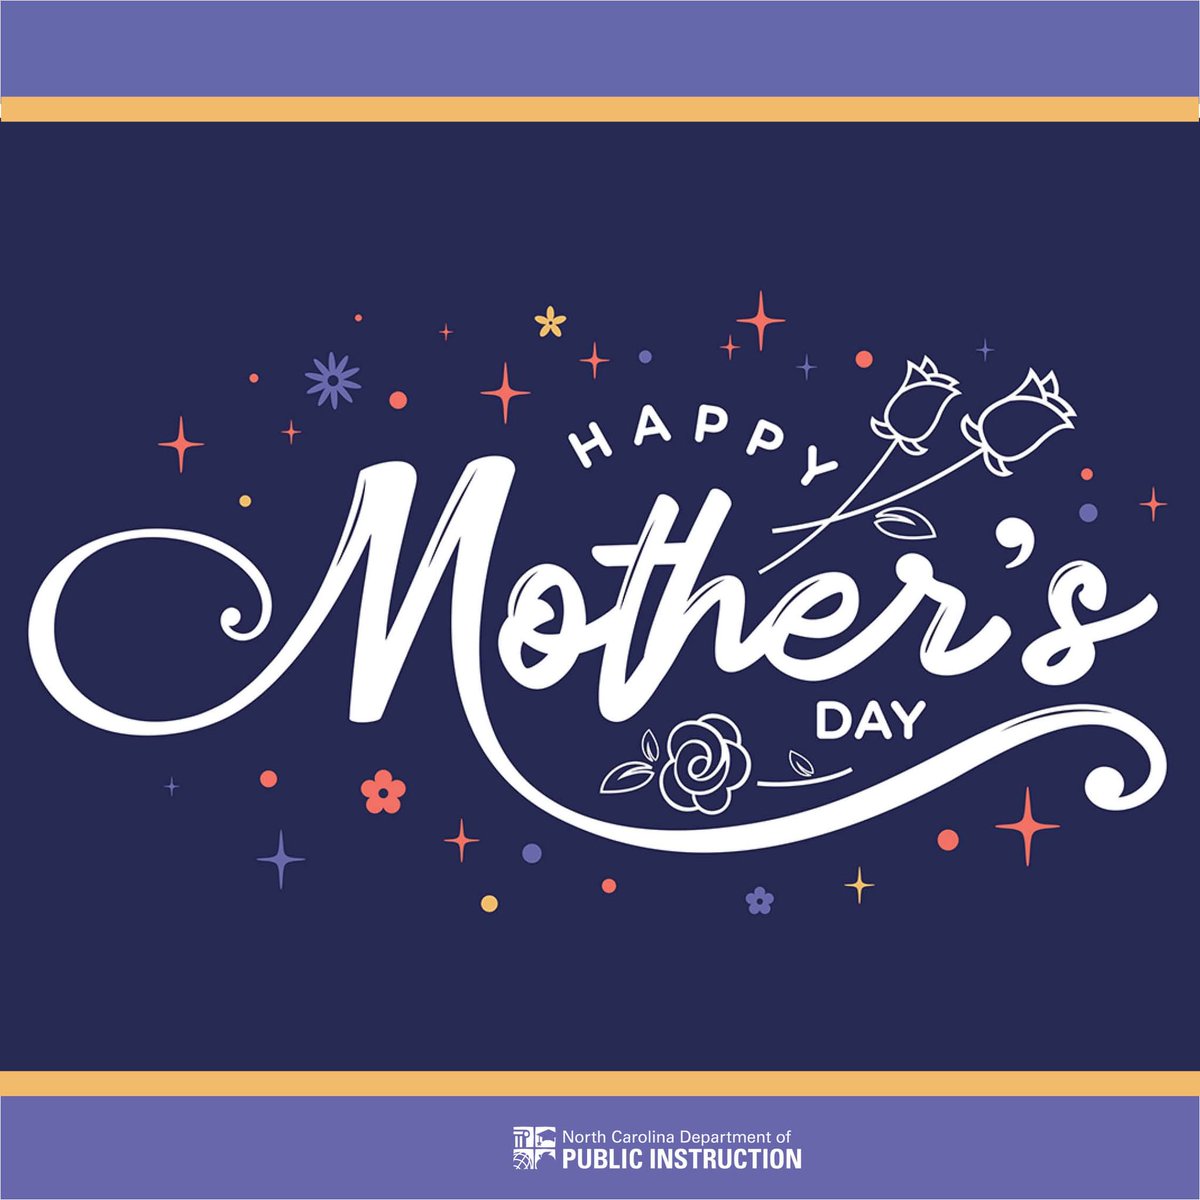 Happy Mother’s Day to mothers, grandmothers, aunts, sisters and all who are role models to the children in their lives. Thank you for the way you lead learning with love and support! We hope you have a wonderful day! #MothersDay2024